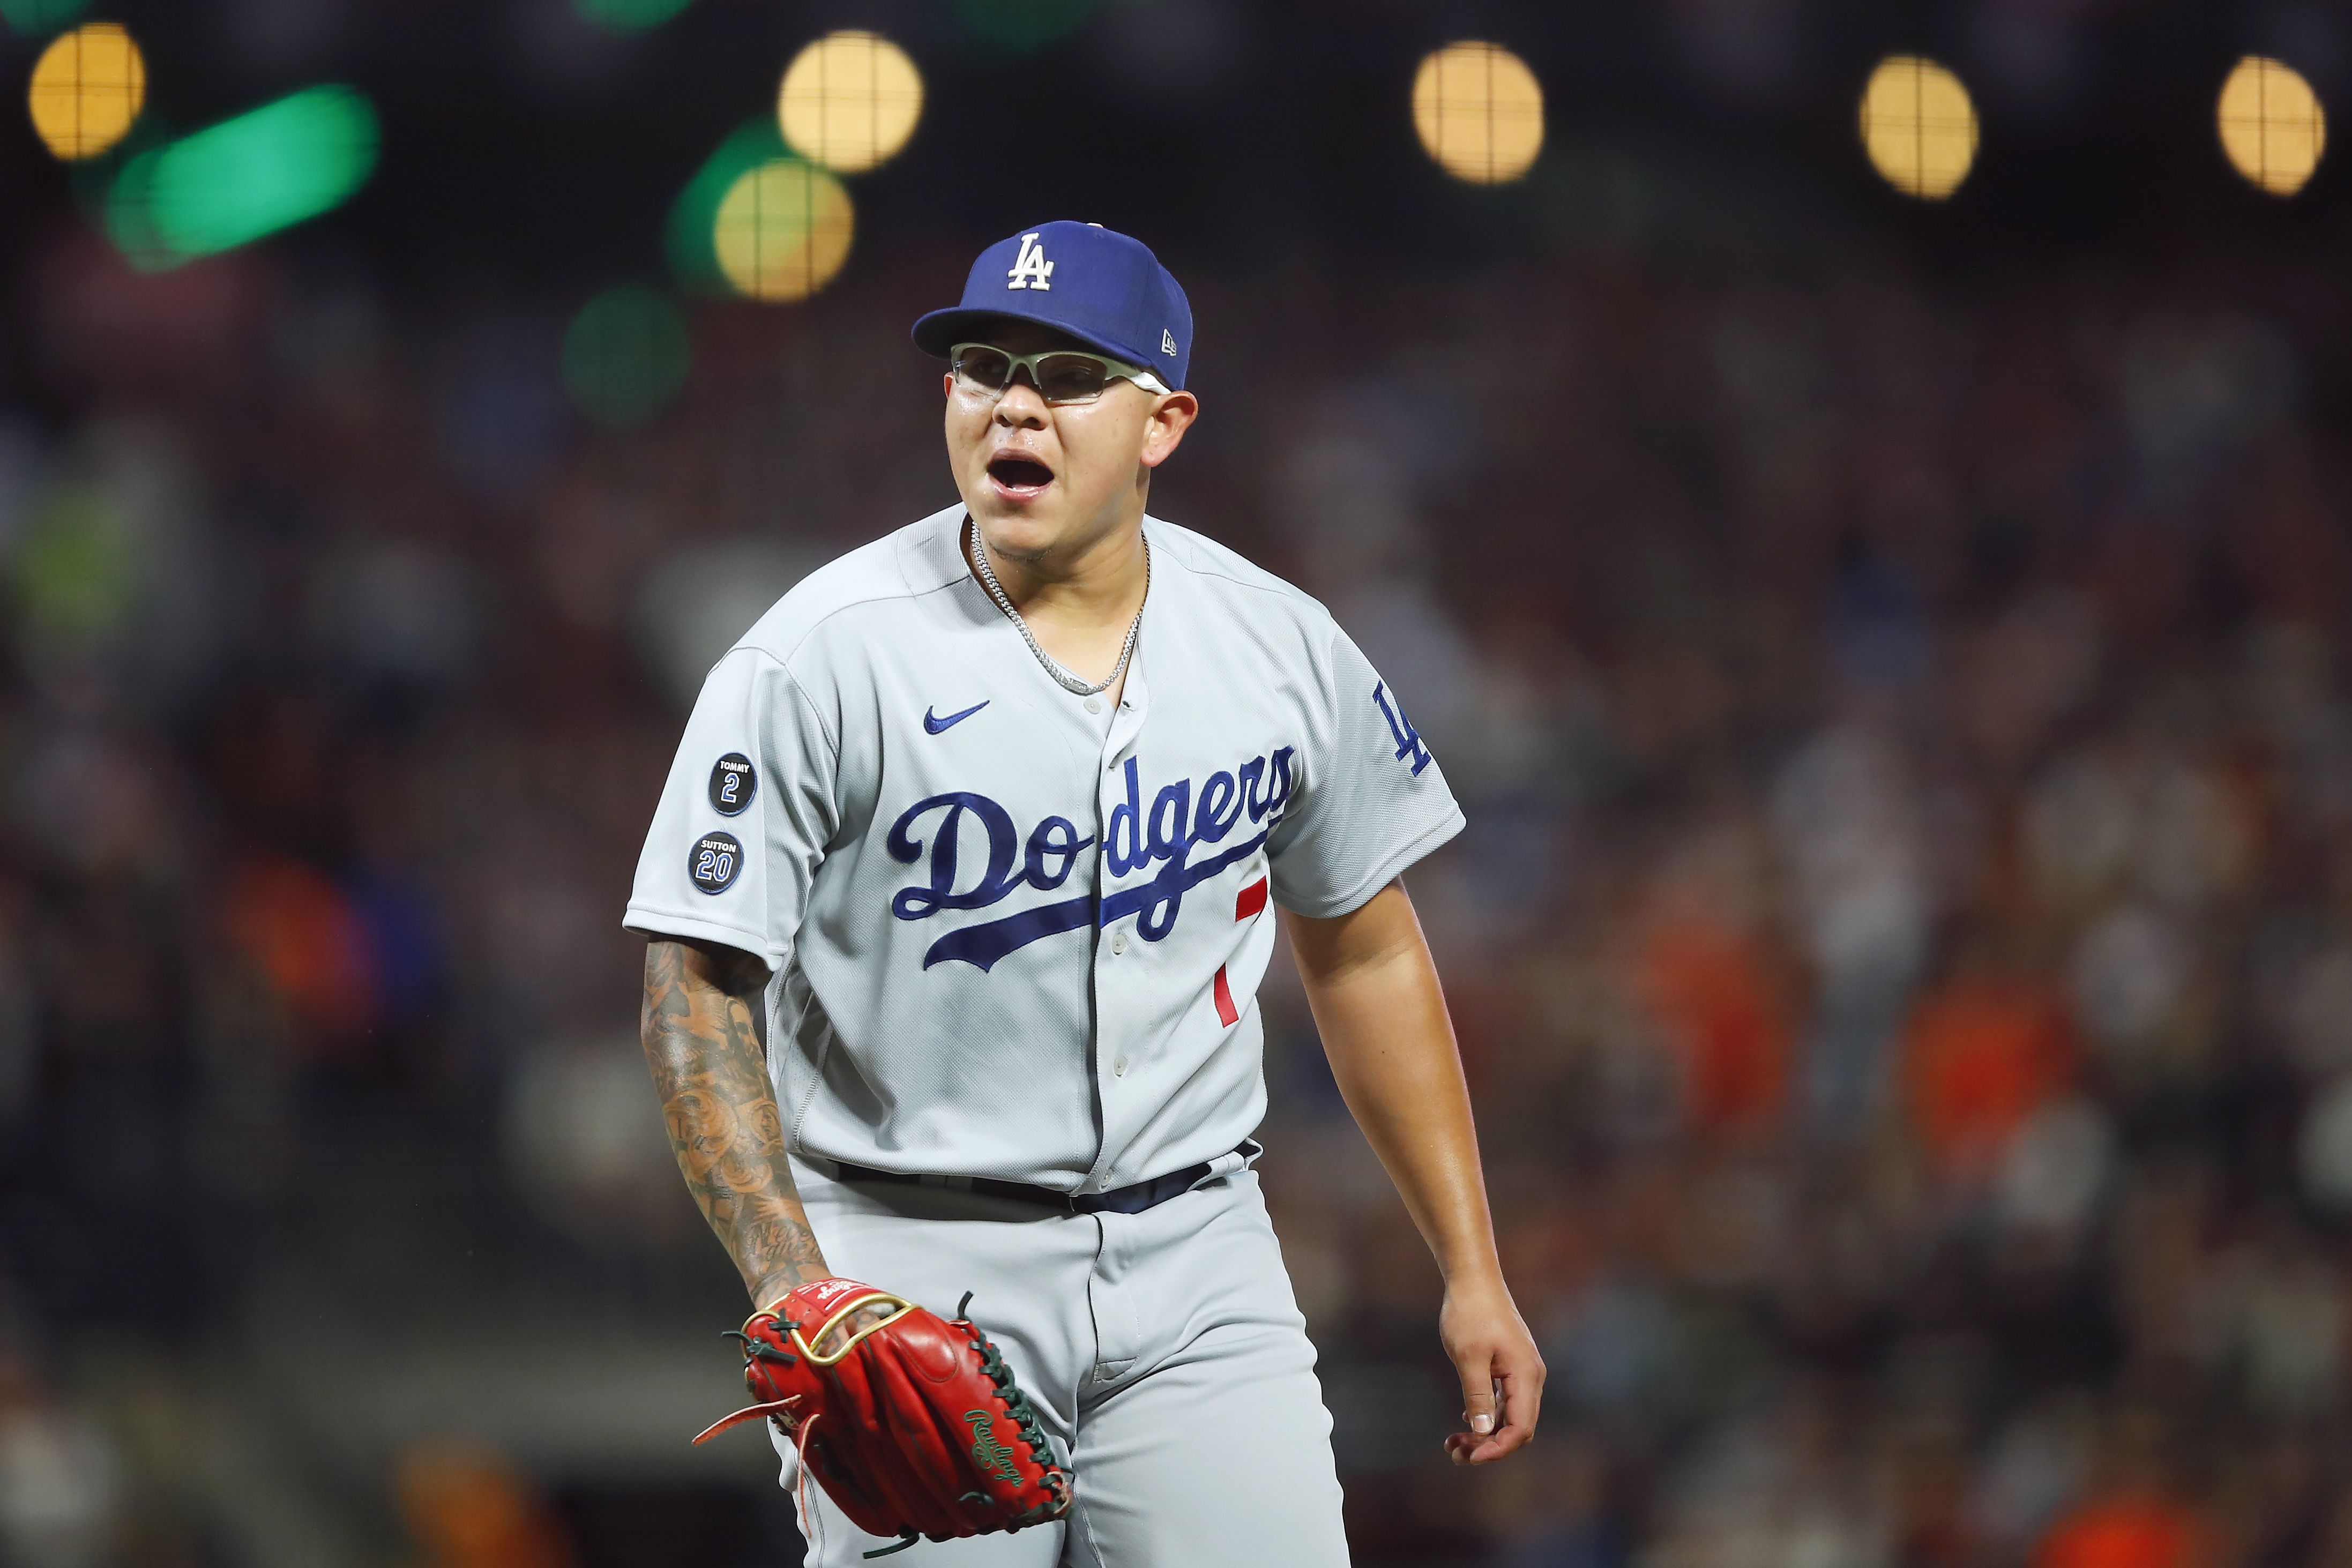 Dave Roberts fires up World Series hopes by declaring 2023 Dodgers